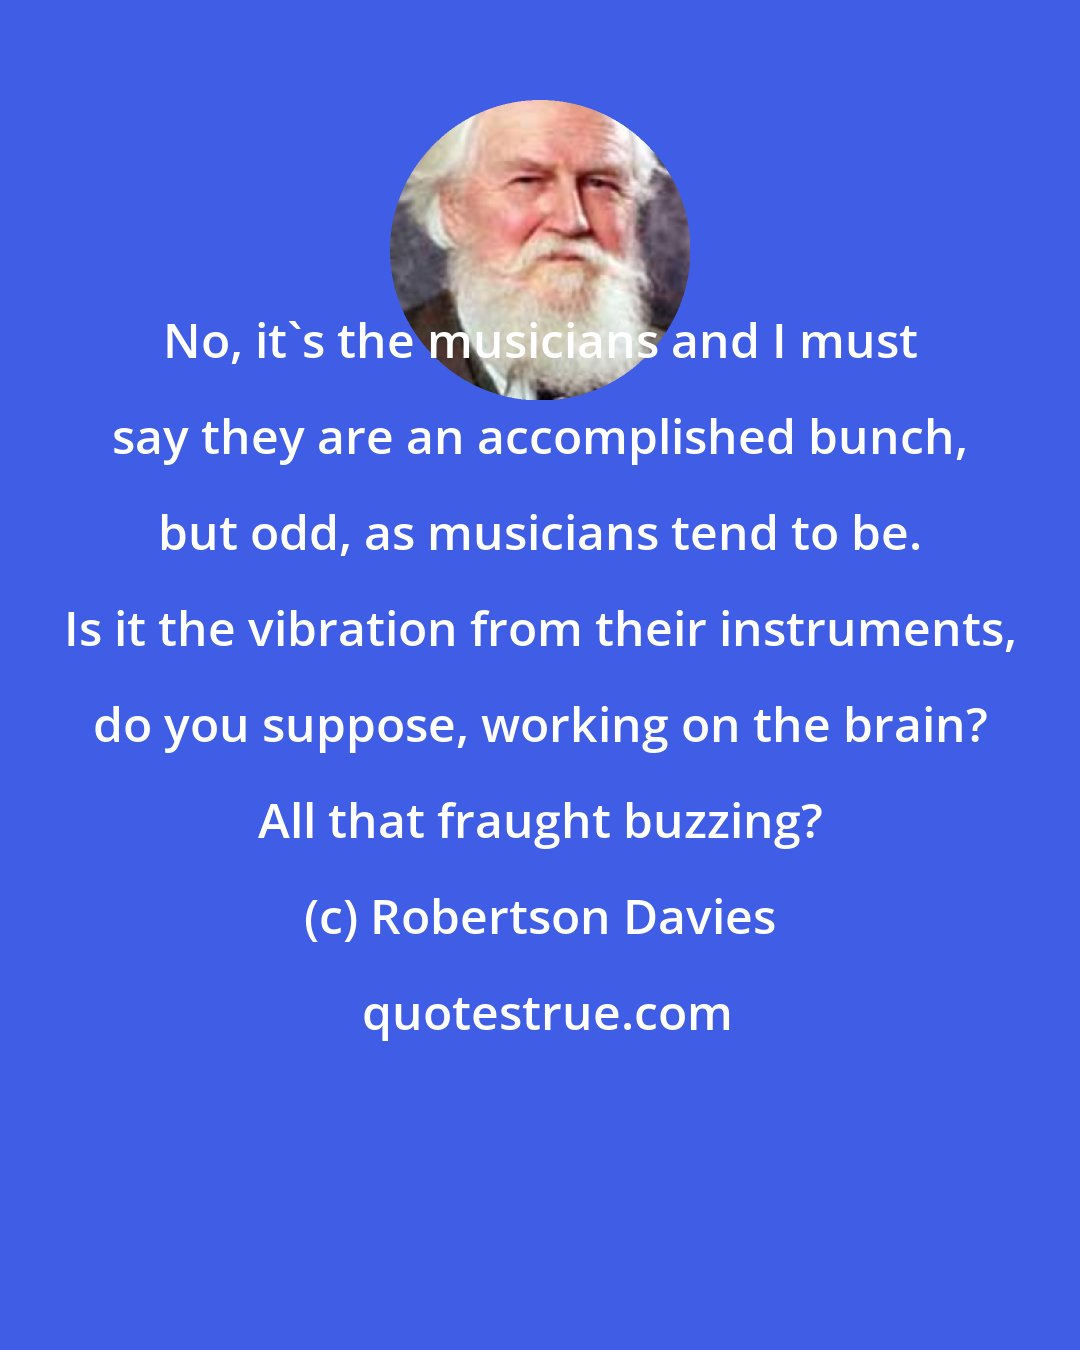 Robertson Davies: No, it's the musicians and I must say they are an accomplished bunch, but odd, as musicians tend to be. Is it the vibration from their instruments, do you suppose, working on the brain? All that fraught buzzing?